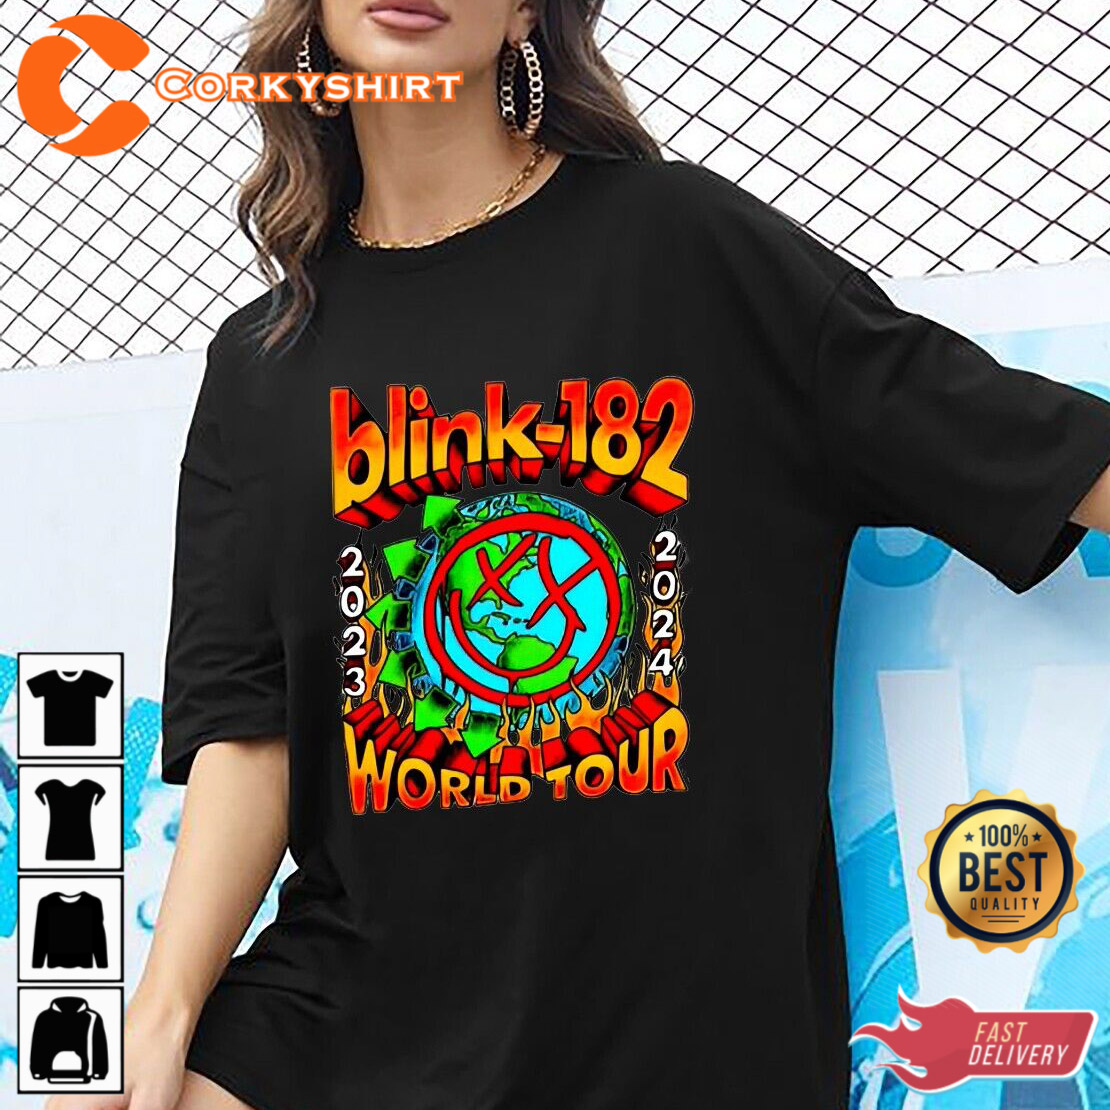 Blink 182 Merch: Embracing Rock Legacy in Style